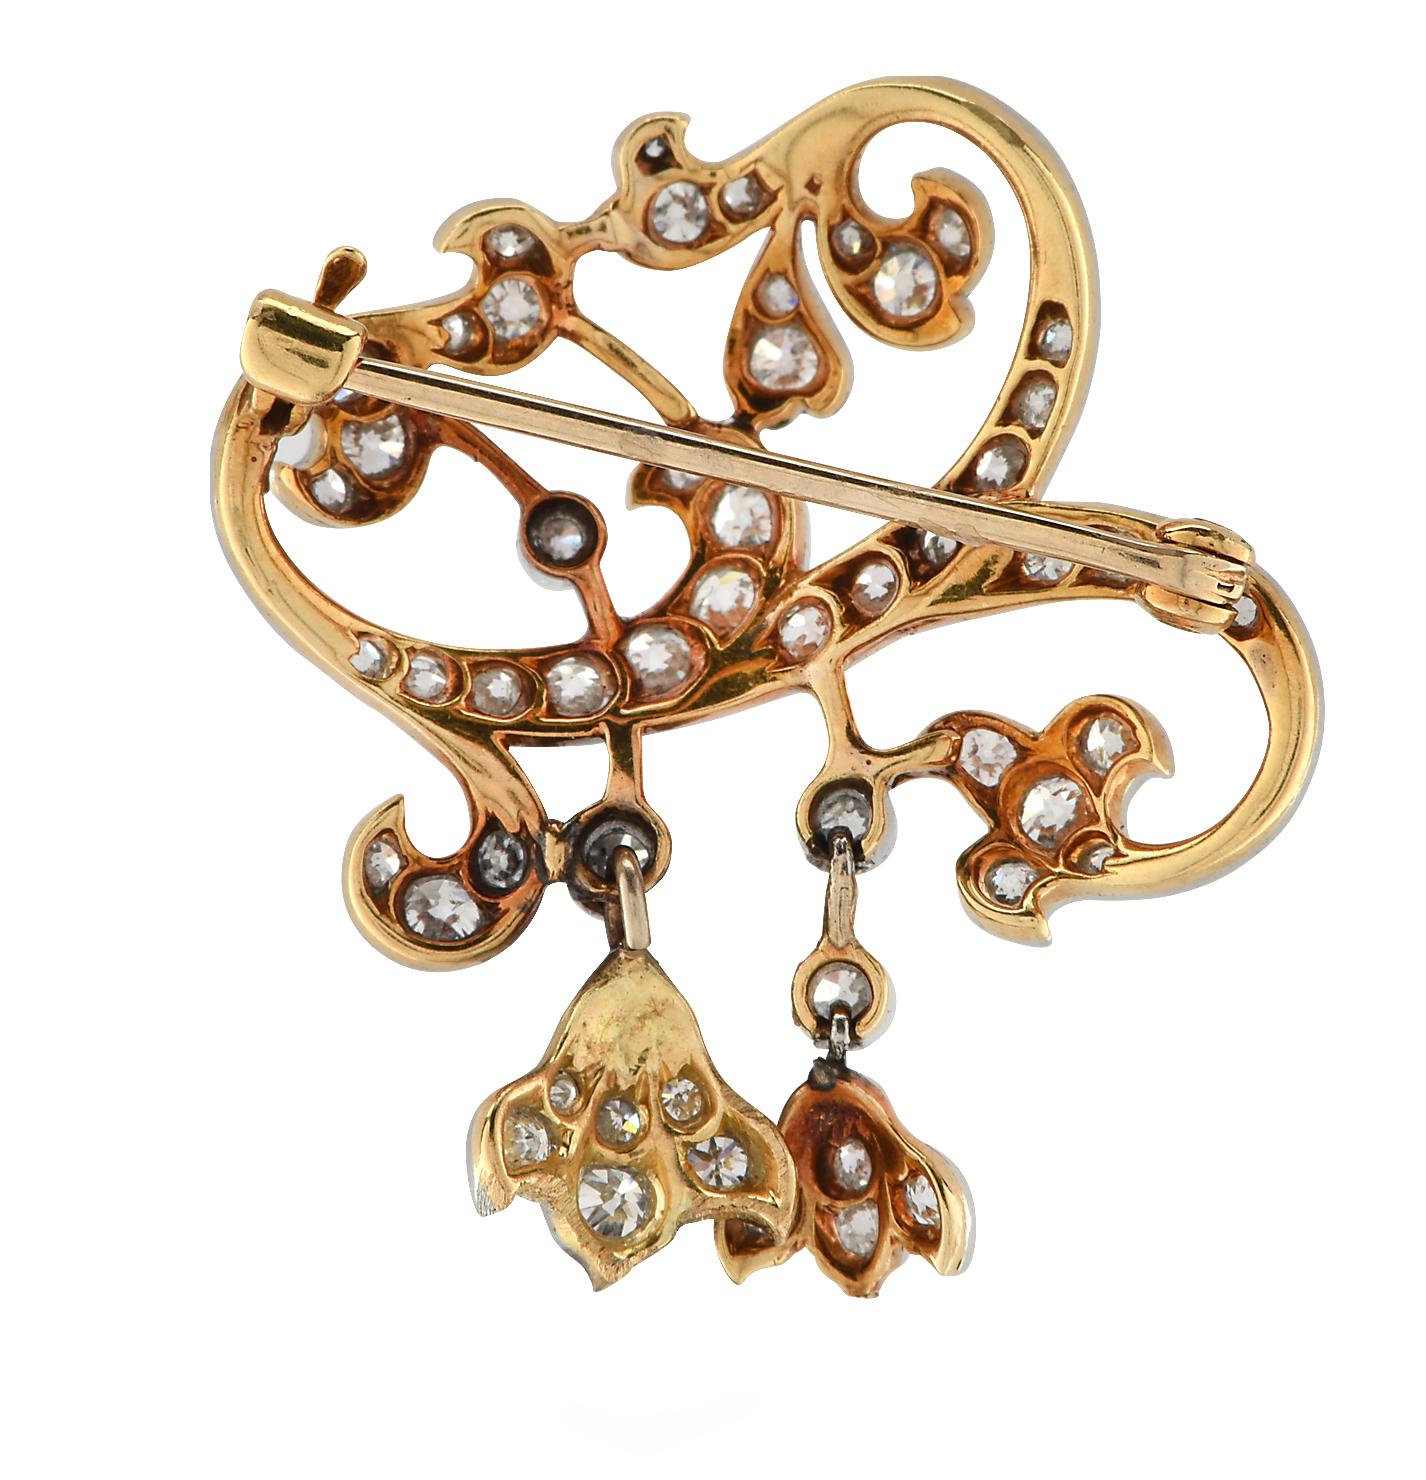 Gorgeous Victorian Brooch Pin crafted in 22 karat yellow gold and platinum, featuring 42 Old European Cut diamonds weighing approximately 1.05 carats total, G color, VS-SI clarity set in a beautiful floral design. This ornate brooch pin measures 30